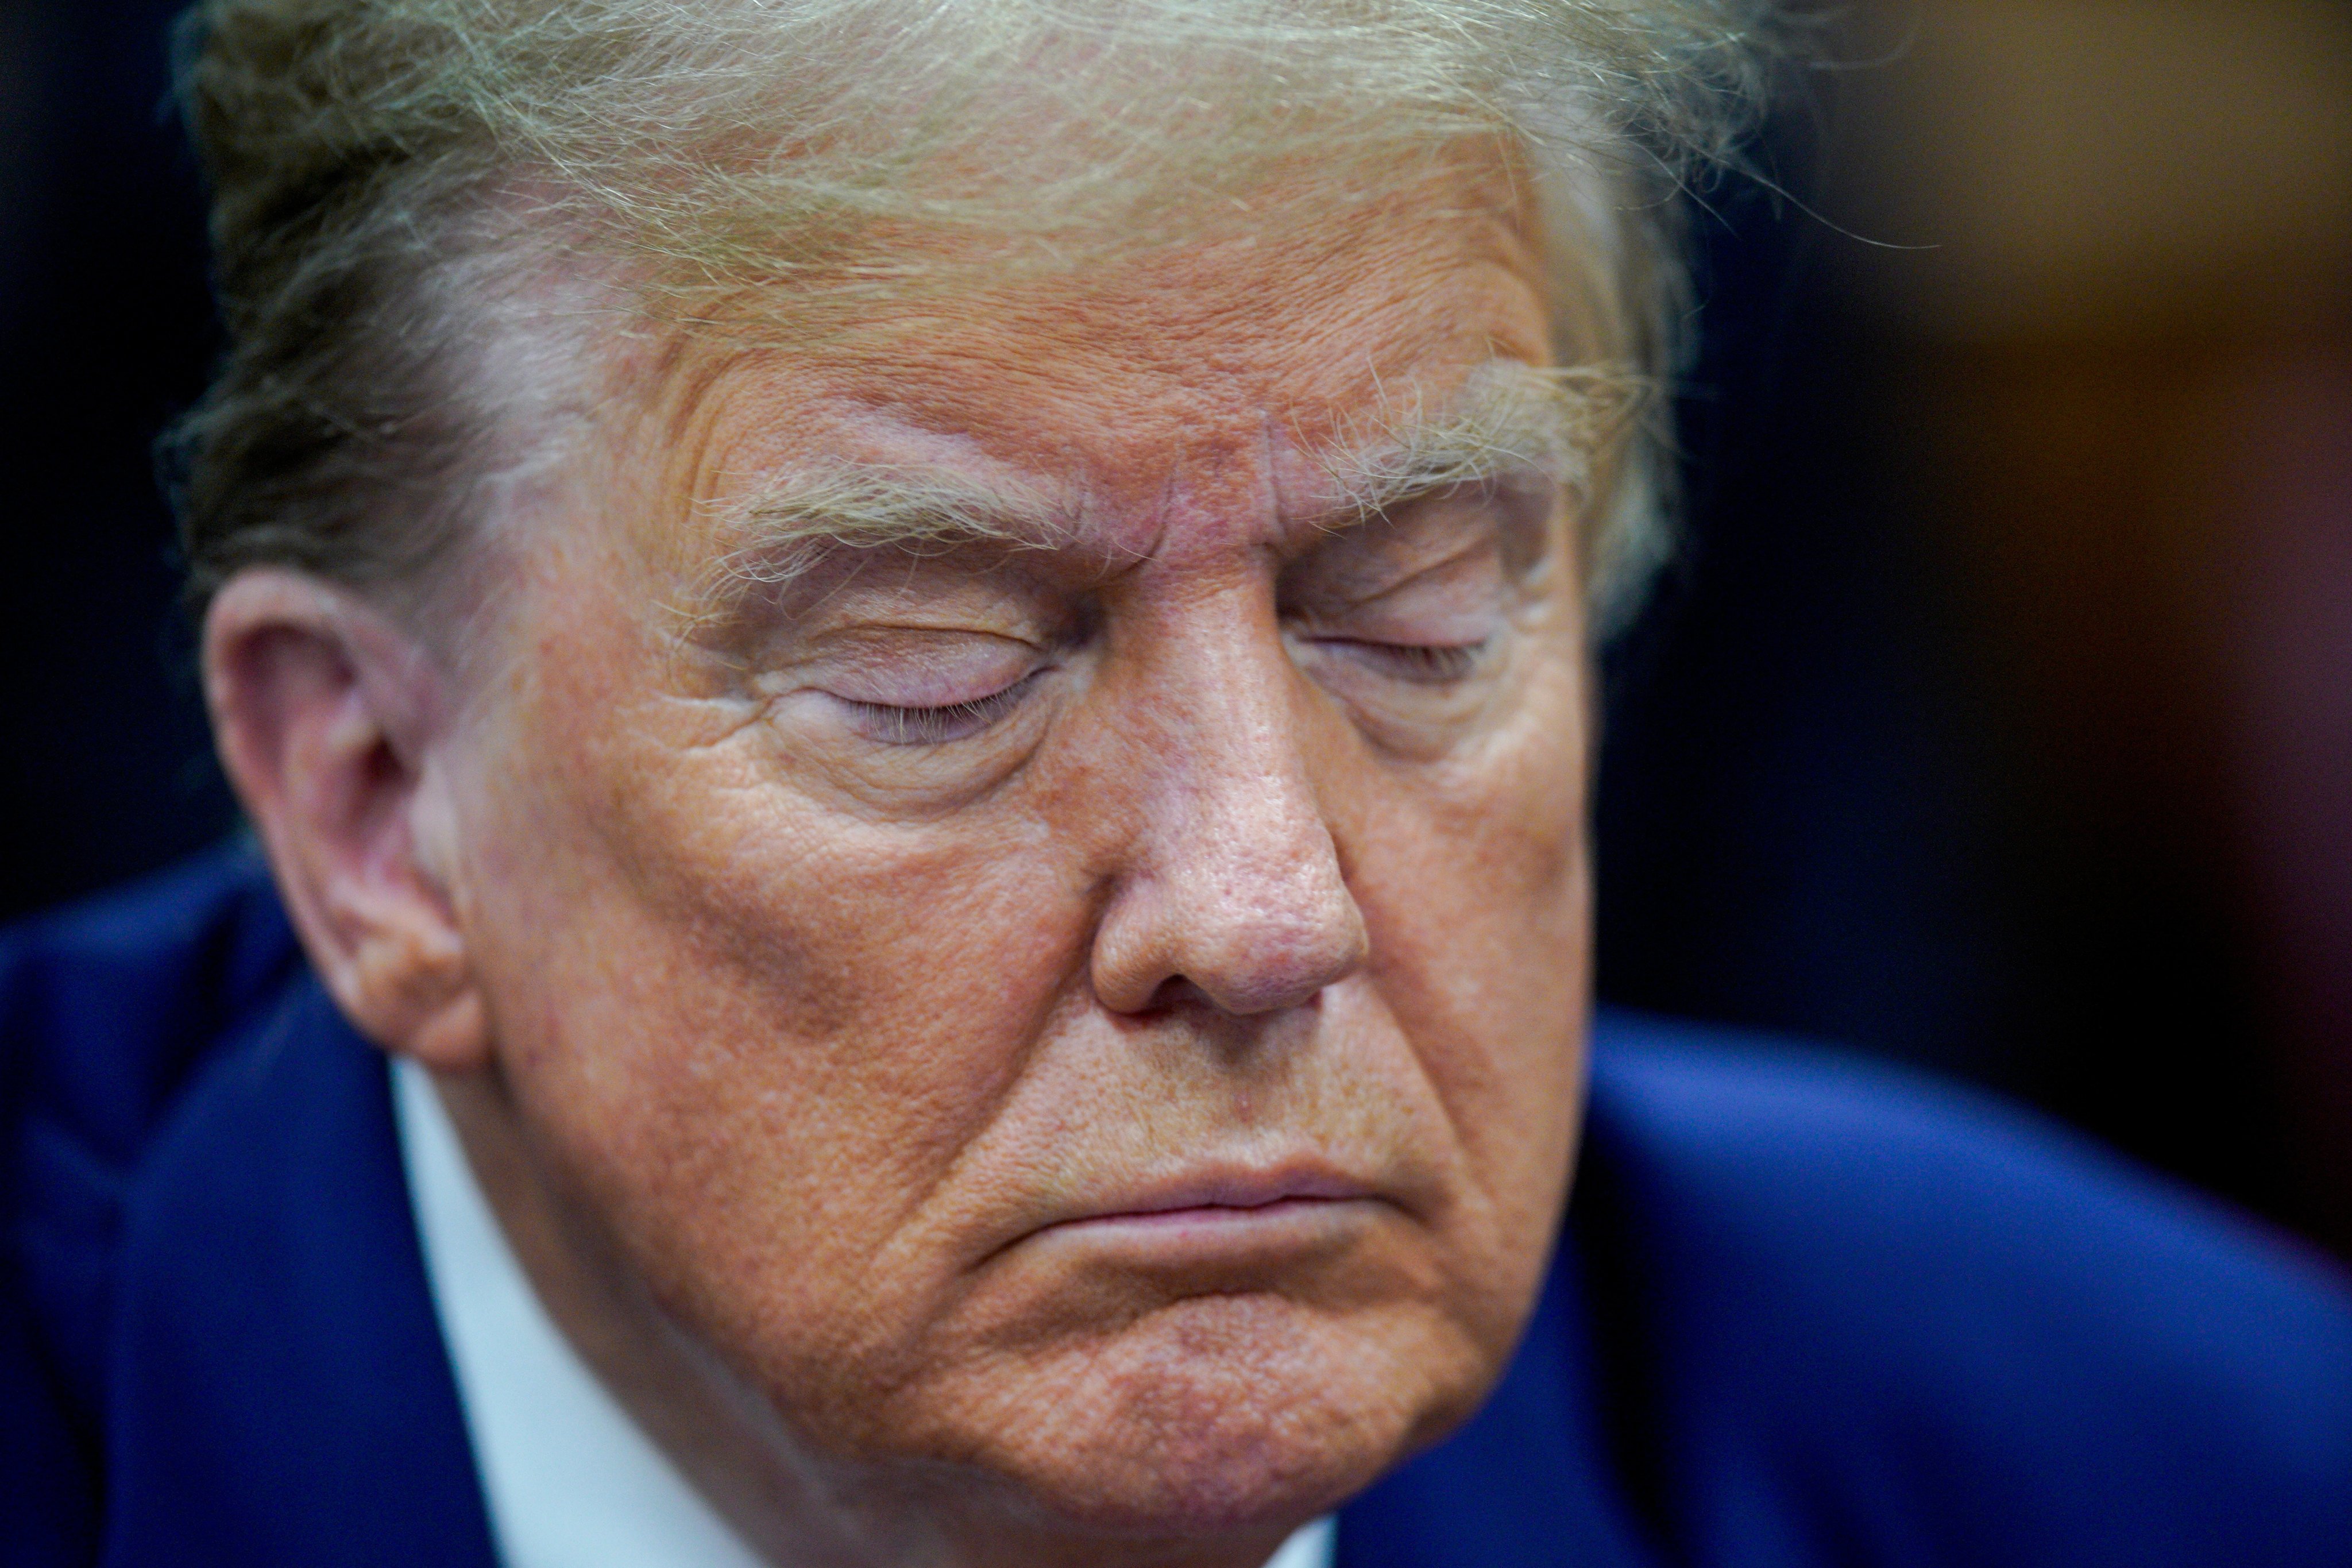 Donald Trump closing his eyes in court during his hush money trial on April 30. Photo: Reuters